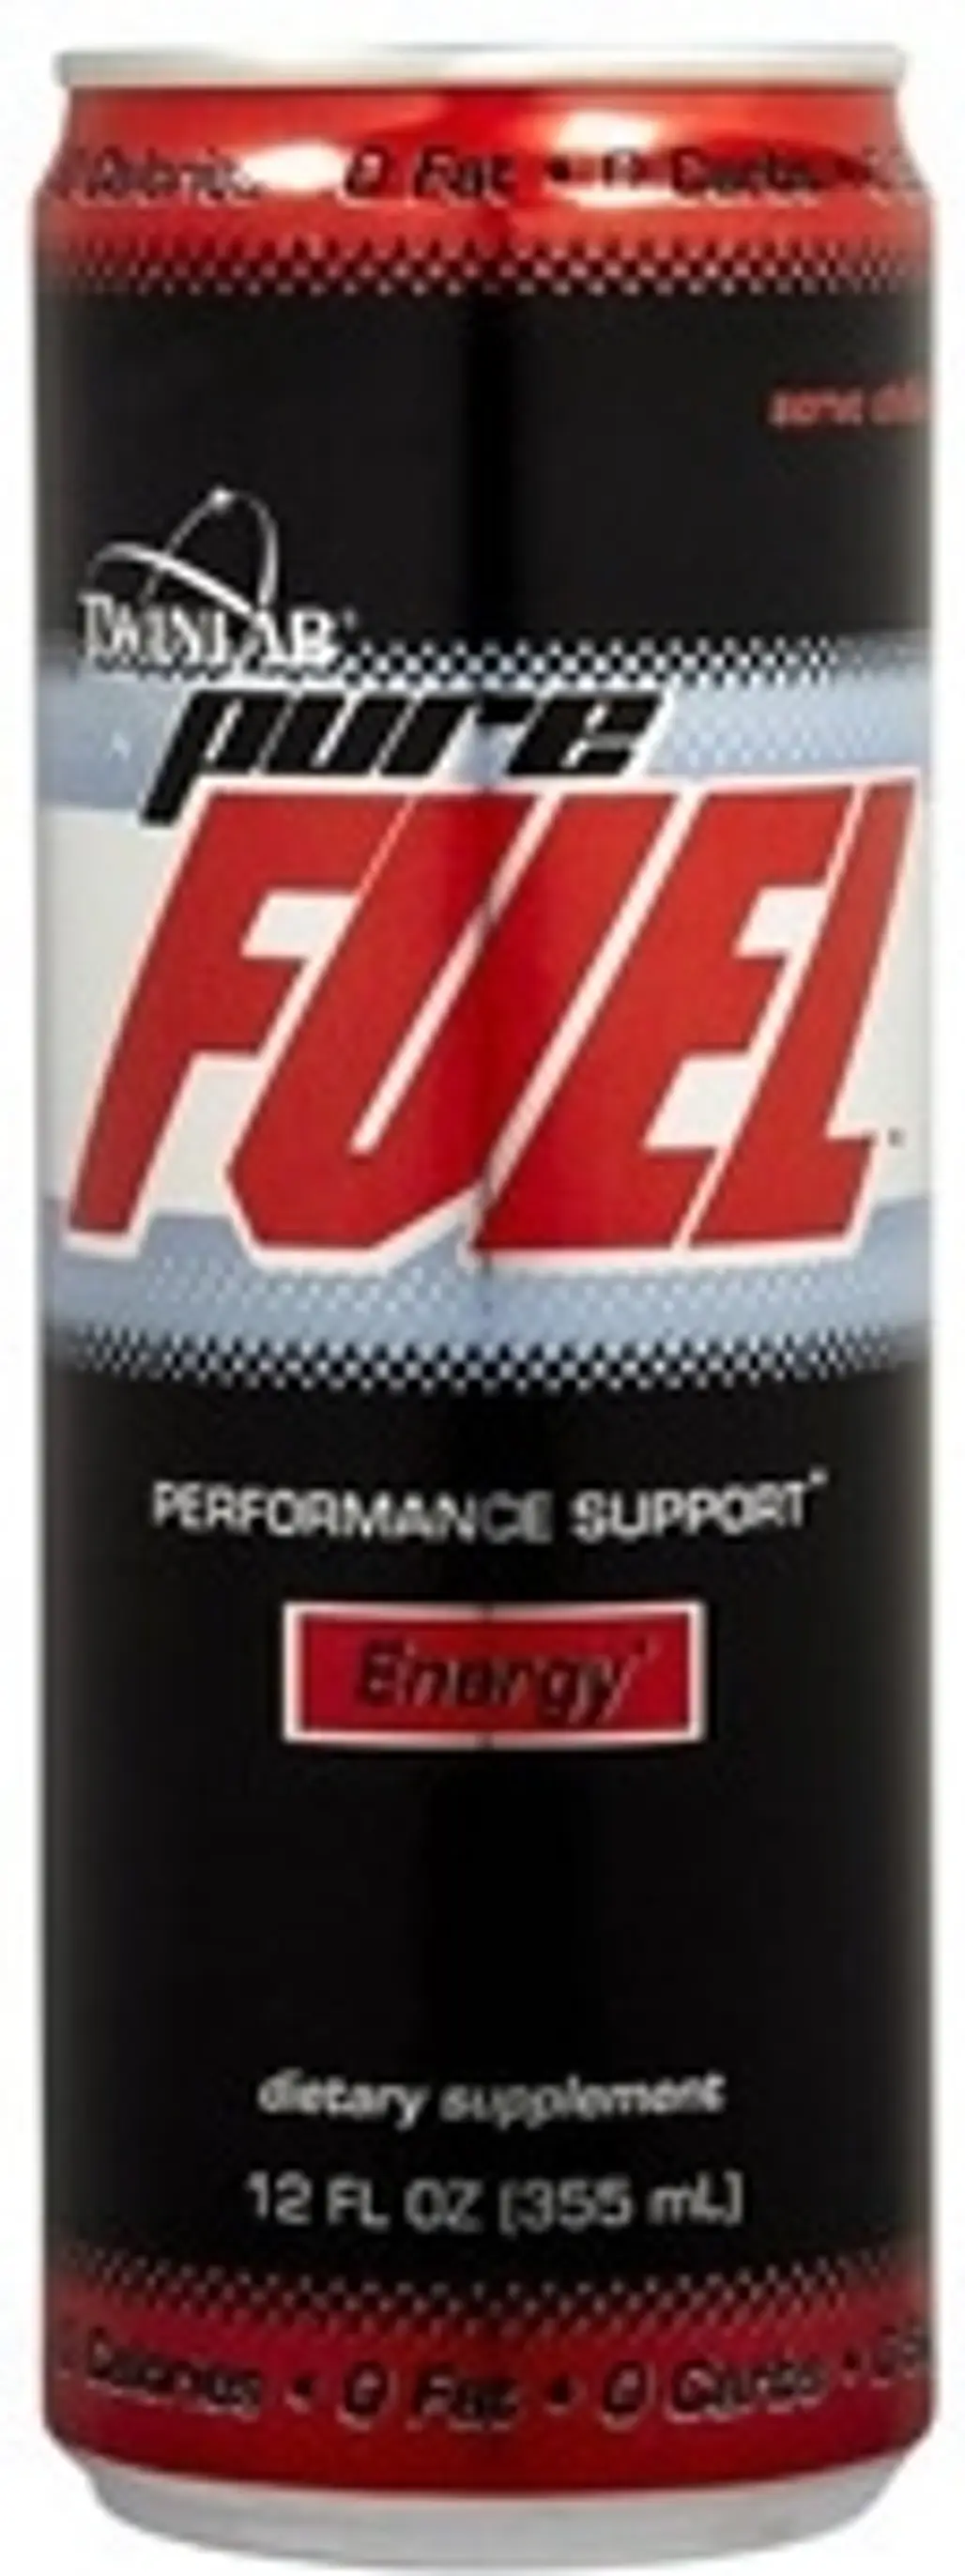 Twinlab Pure Fuel Energy Drink